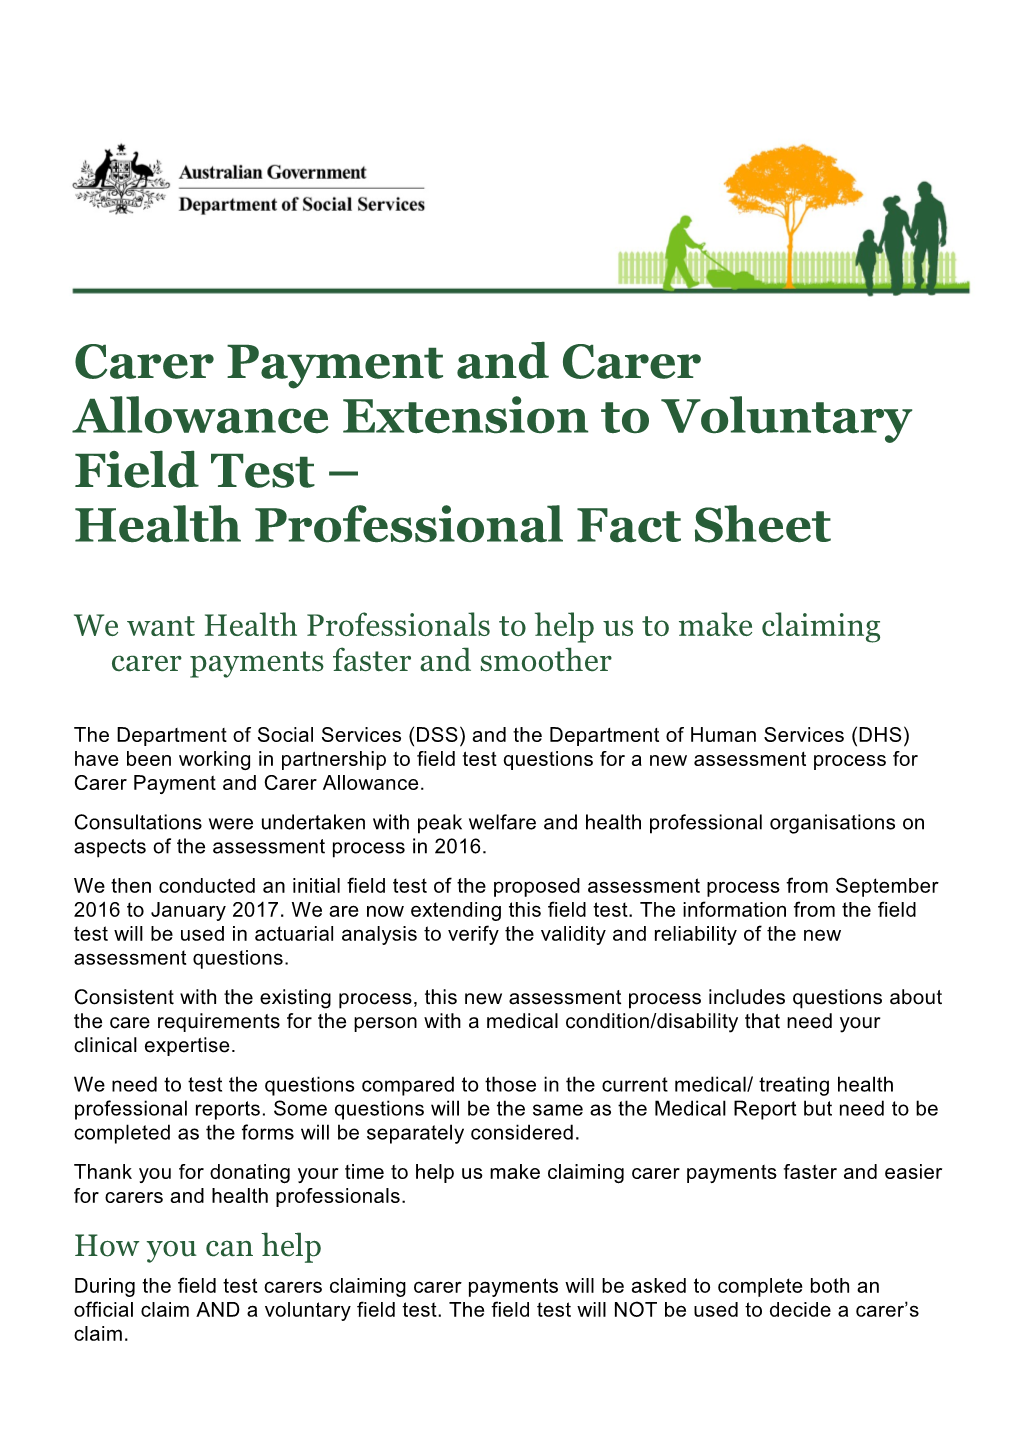 We Want Health Professionals to Help Us to Make Claiming Carer Payments Faster and Smoother